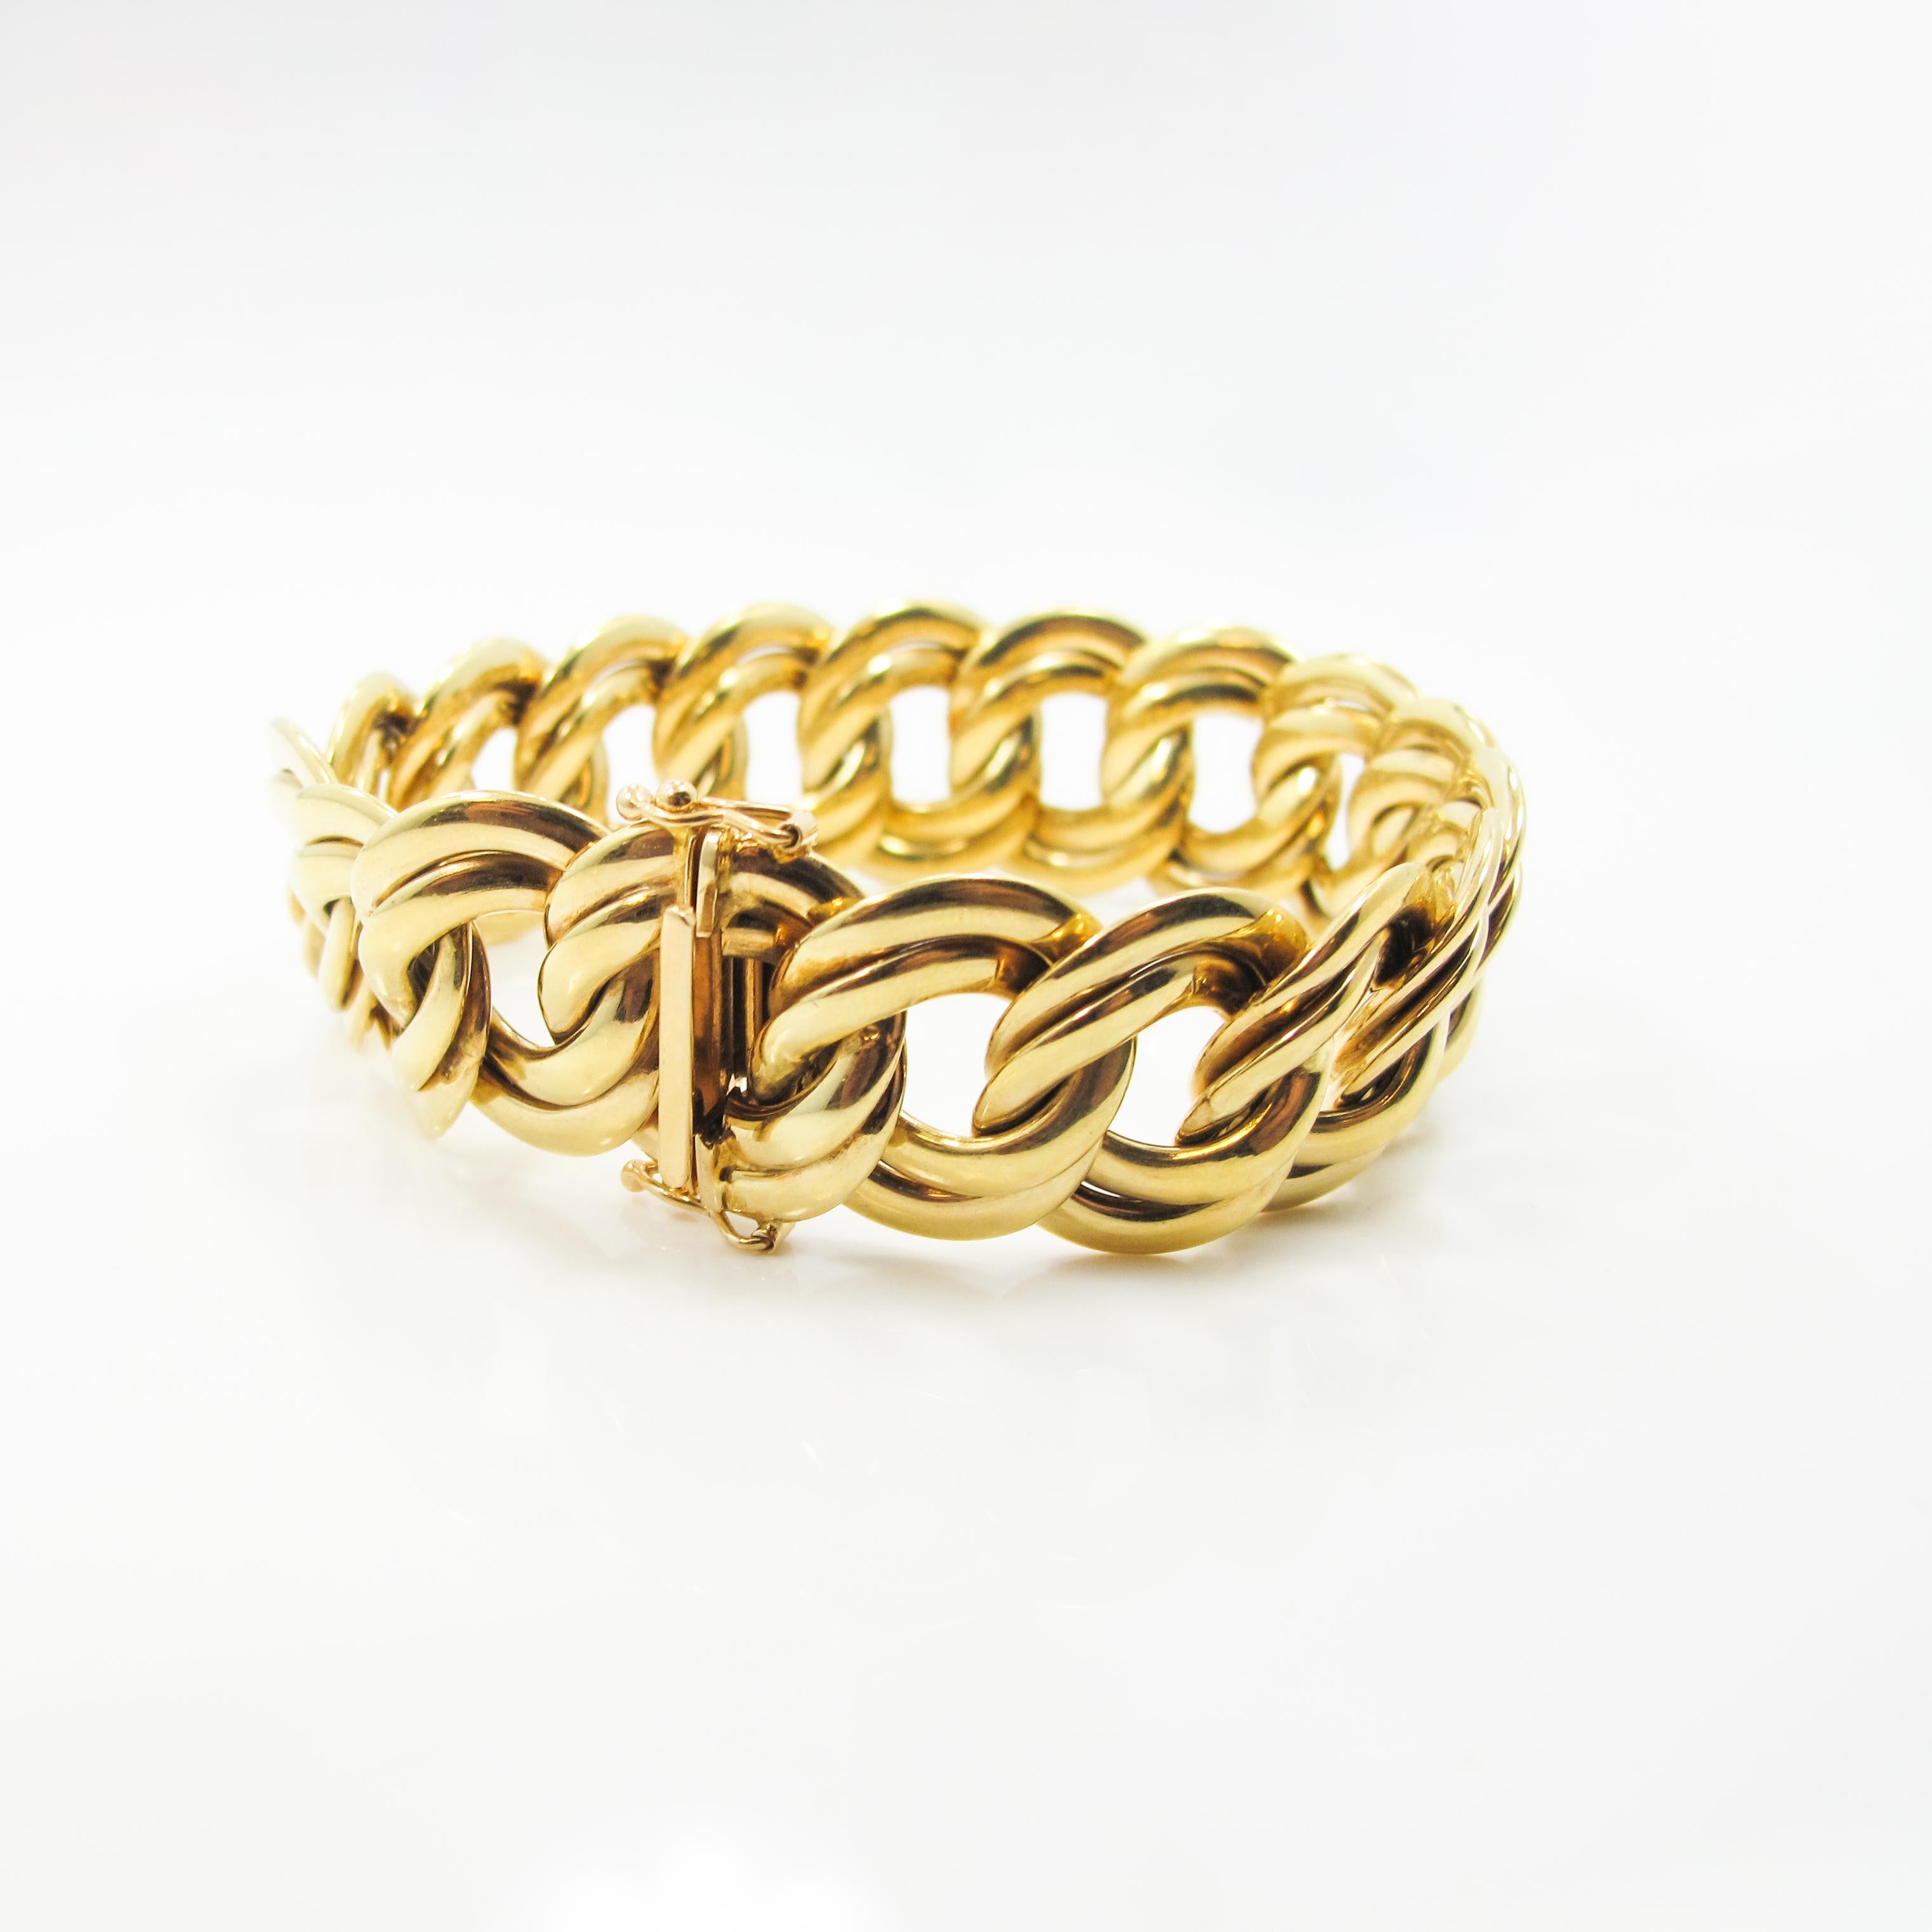 This bracelet features double ringlet loops that are connected in a woven link fashion. The bracelet features a uniform box clasp with double figure eight safeties. The bracelet is used/refinished, 14k yellow gold, 35.81g. Size 7.5.